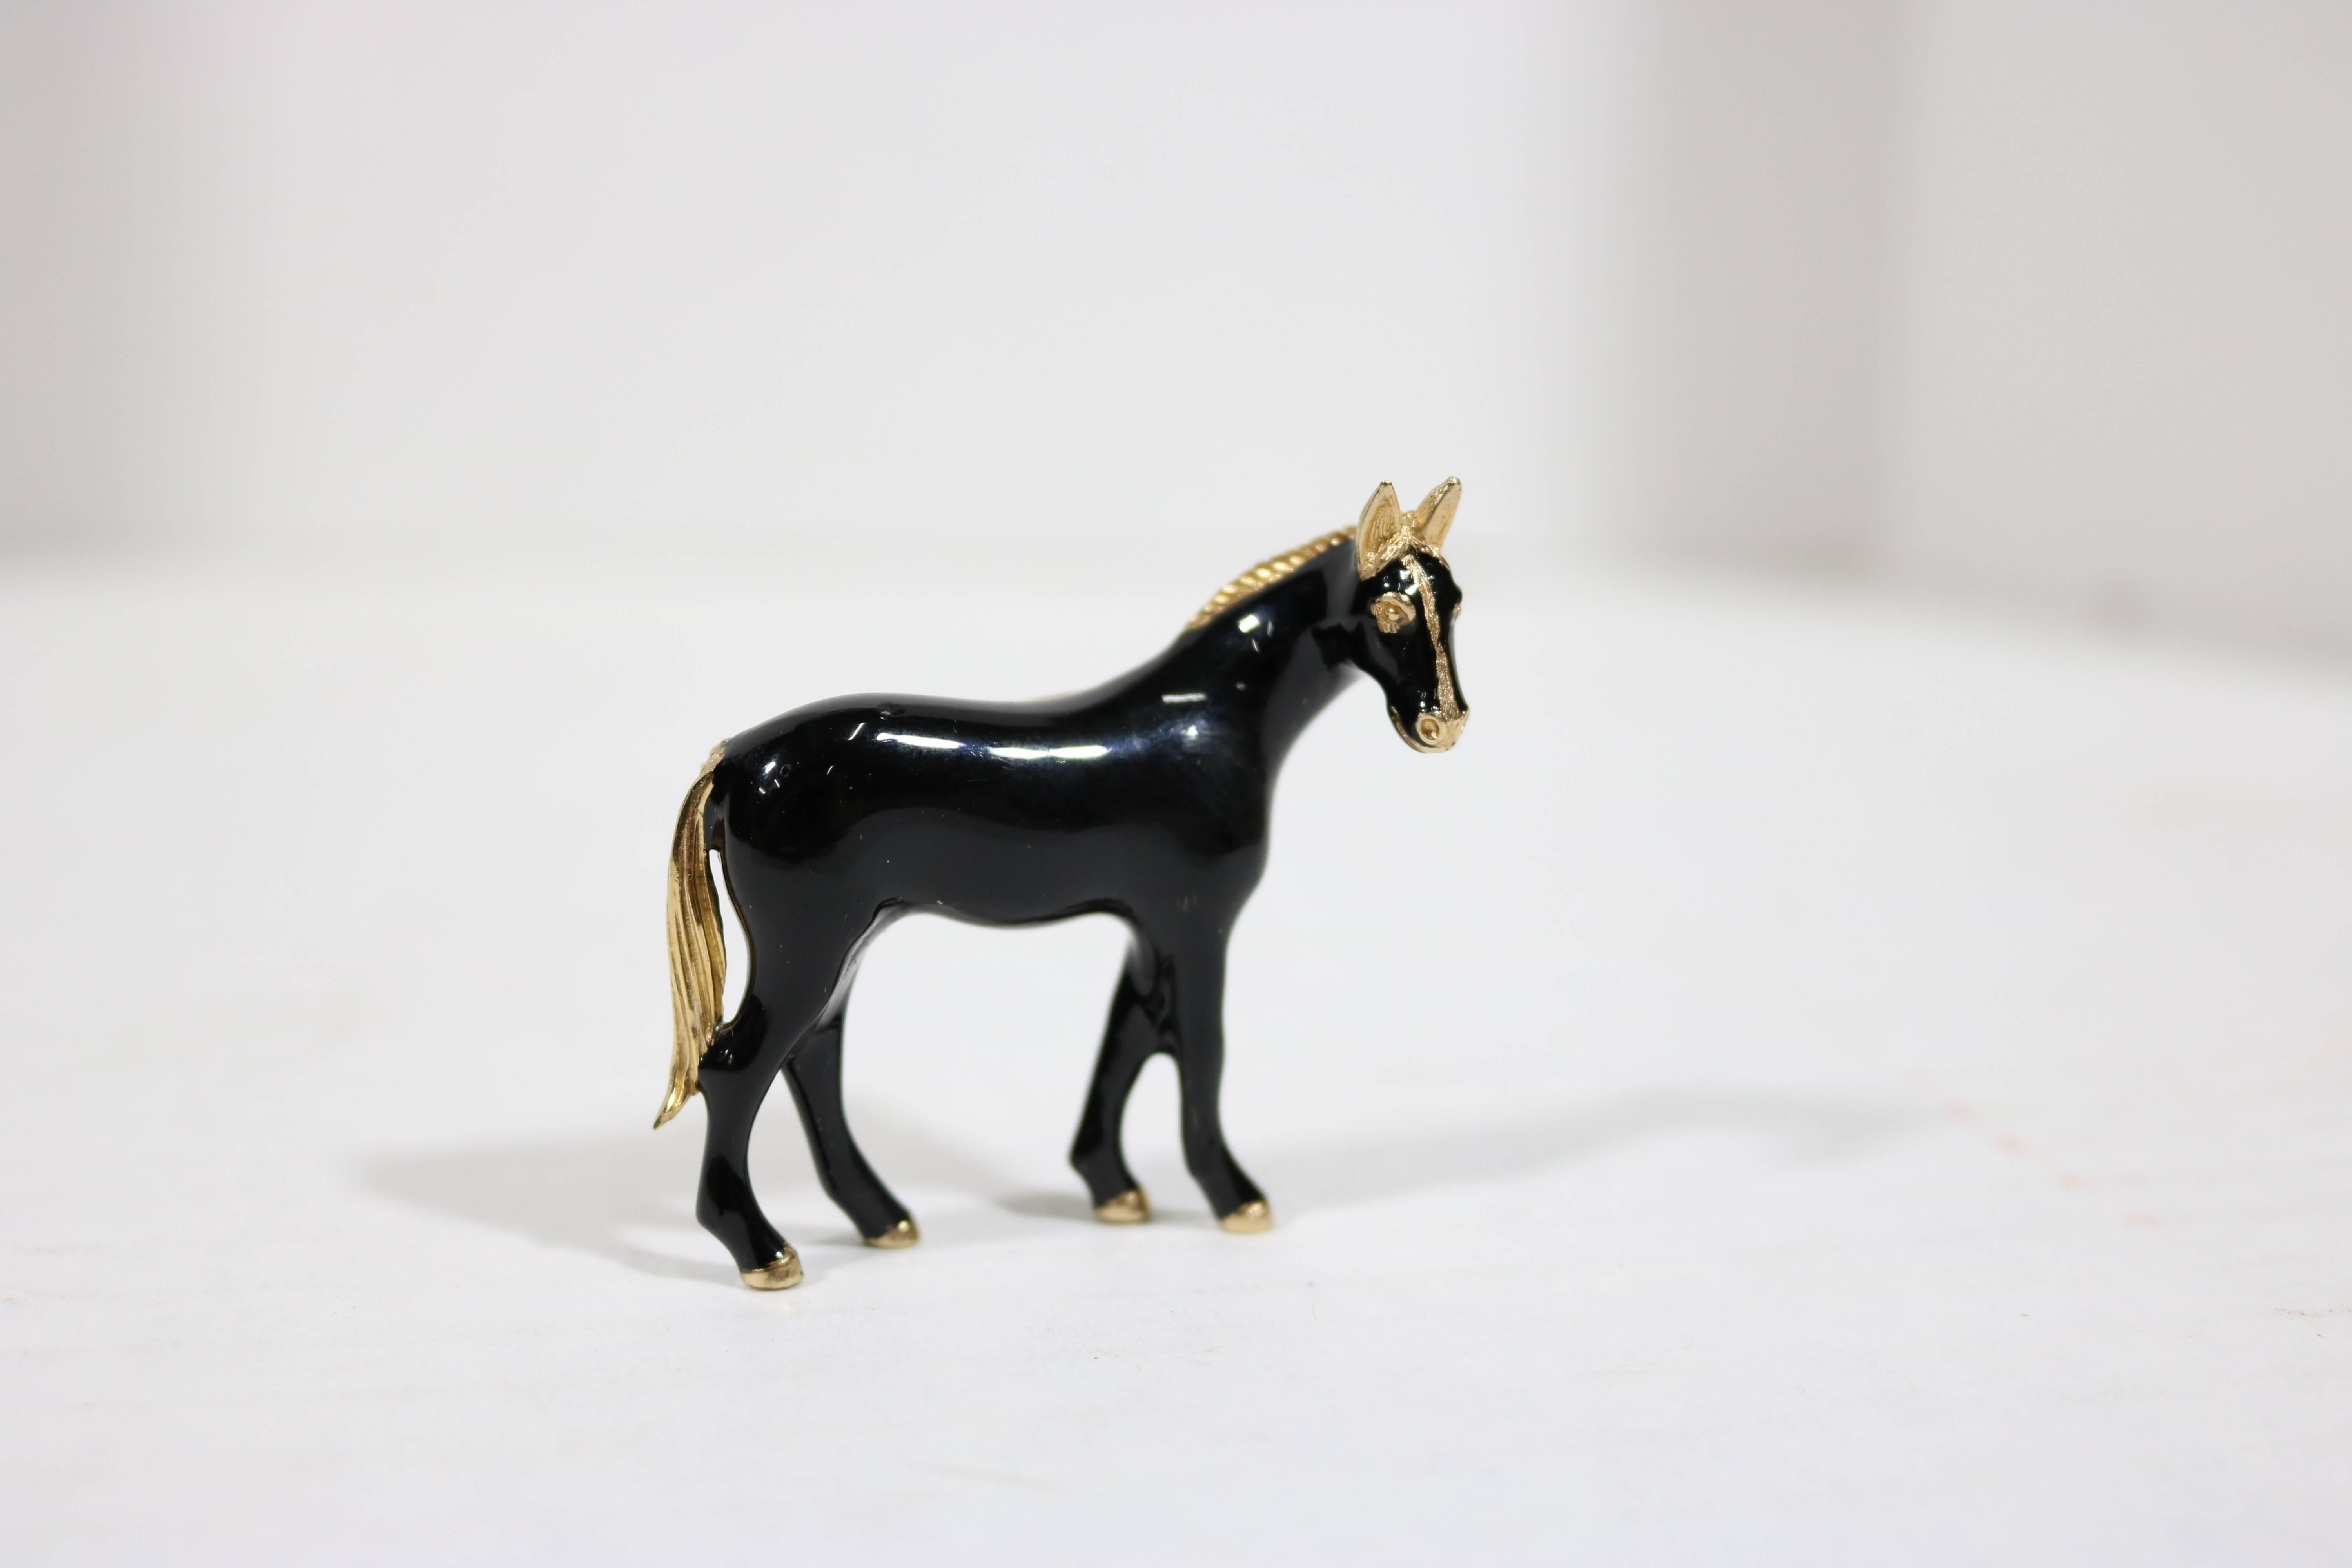 Mid-20th century distinctive Black Stallion brooch with his head turned to look at viewer-skillfully fabricated and designed very handsome jet lustrous enamel with gold plate trim brooch with interior gold circle design, marked, copyright Ciner on